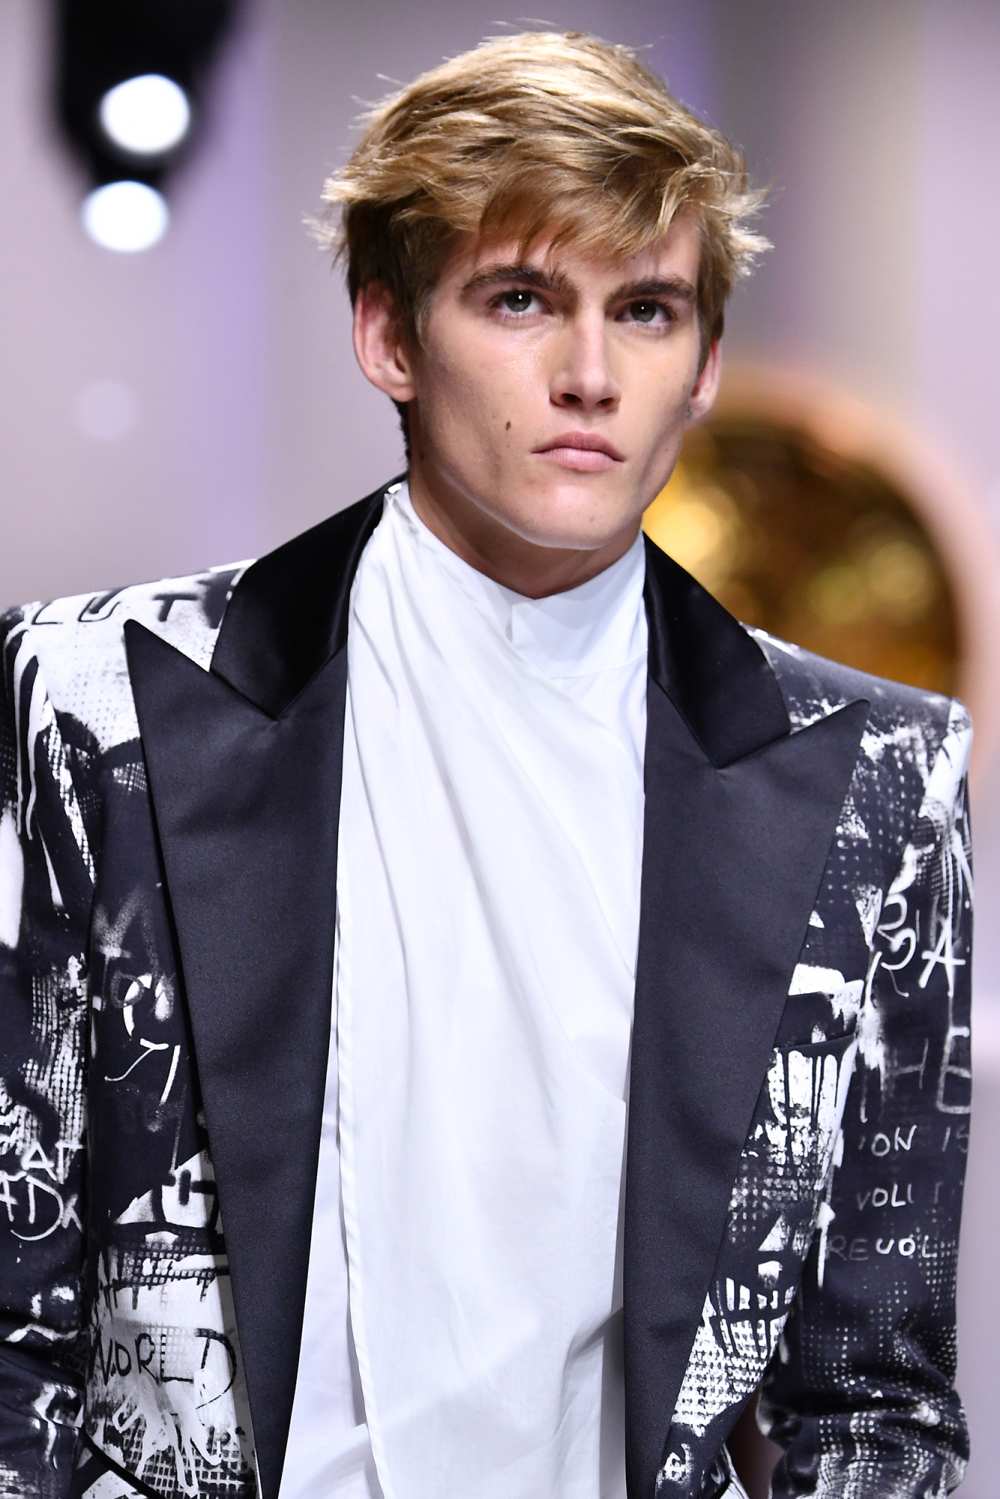 Presley Gerber Charged With DUI 2 Months After Arrest